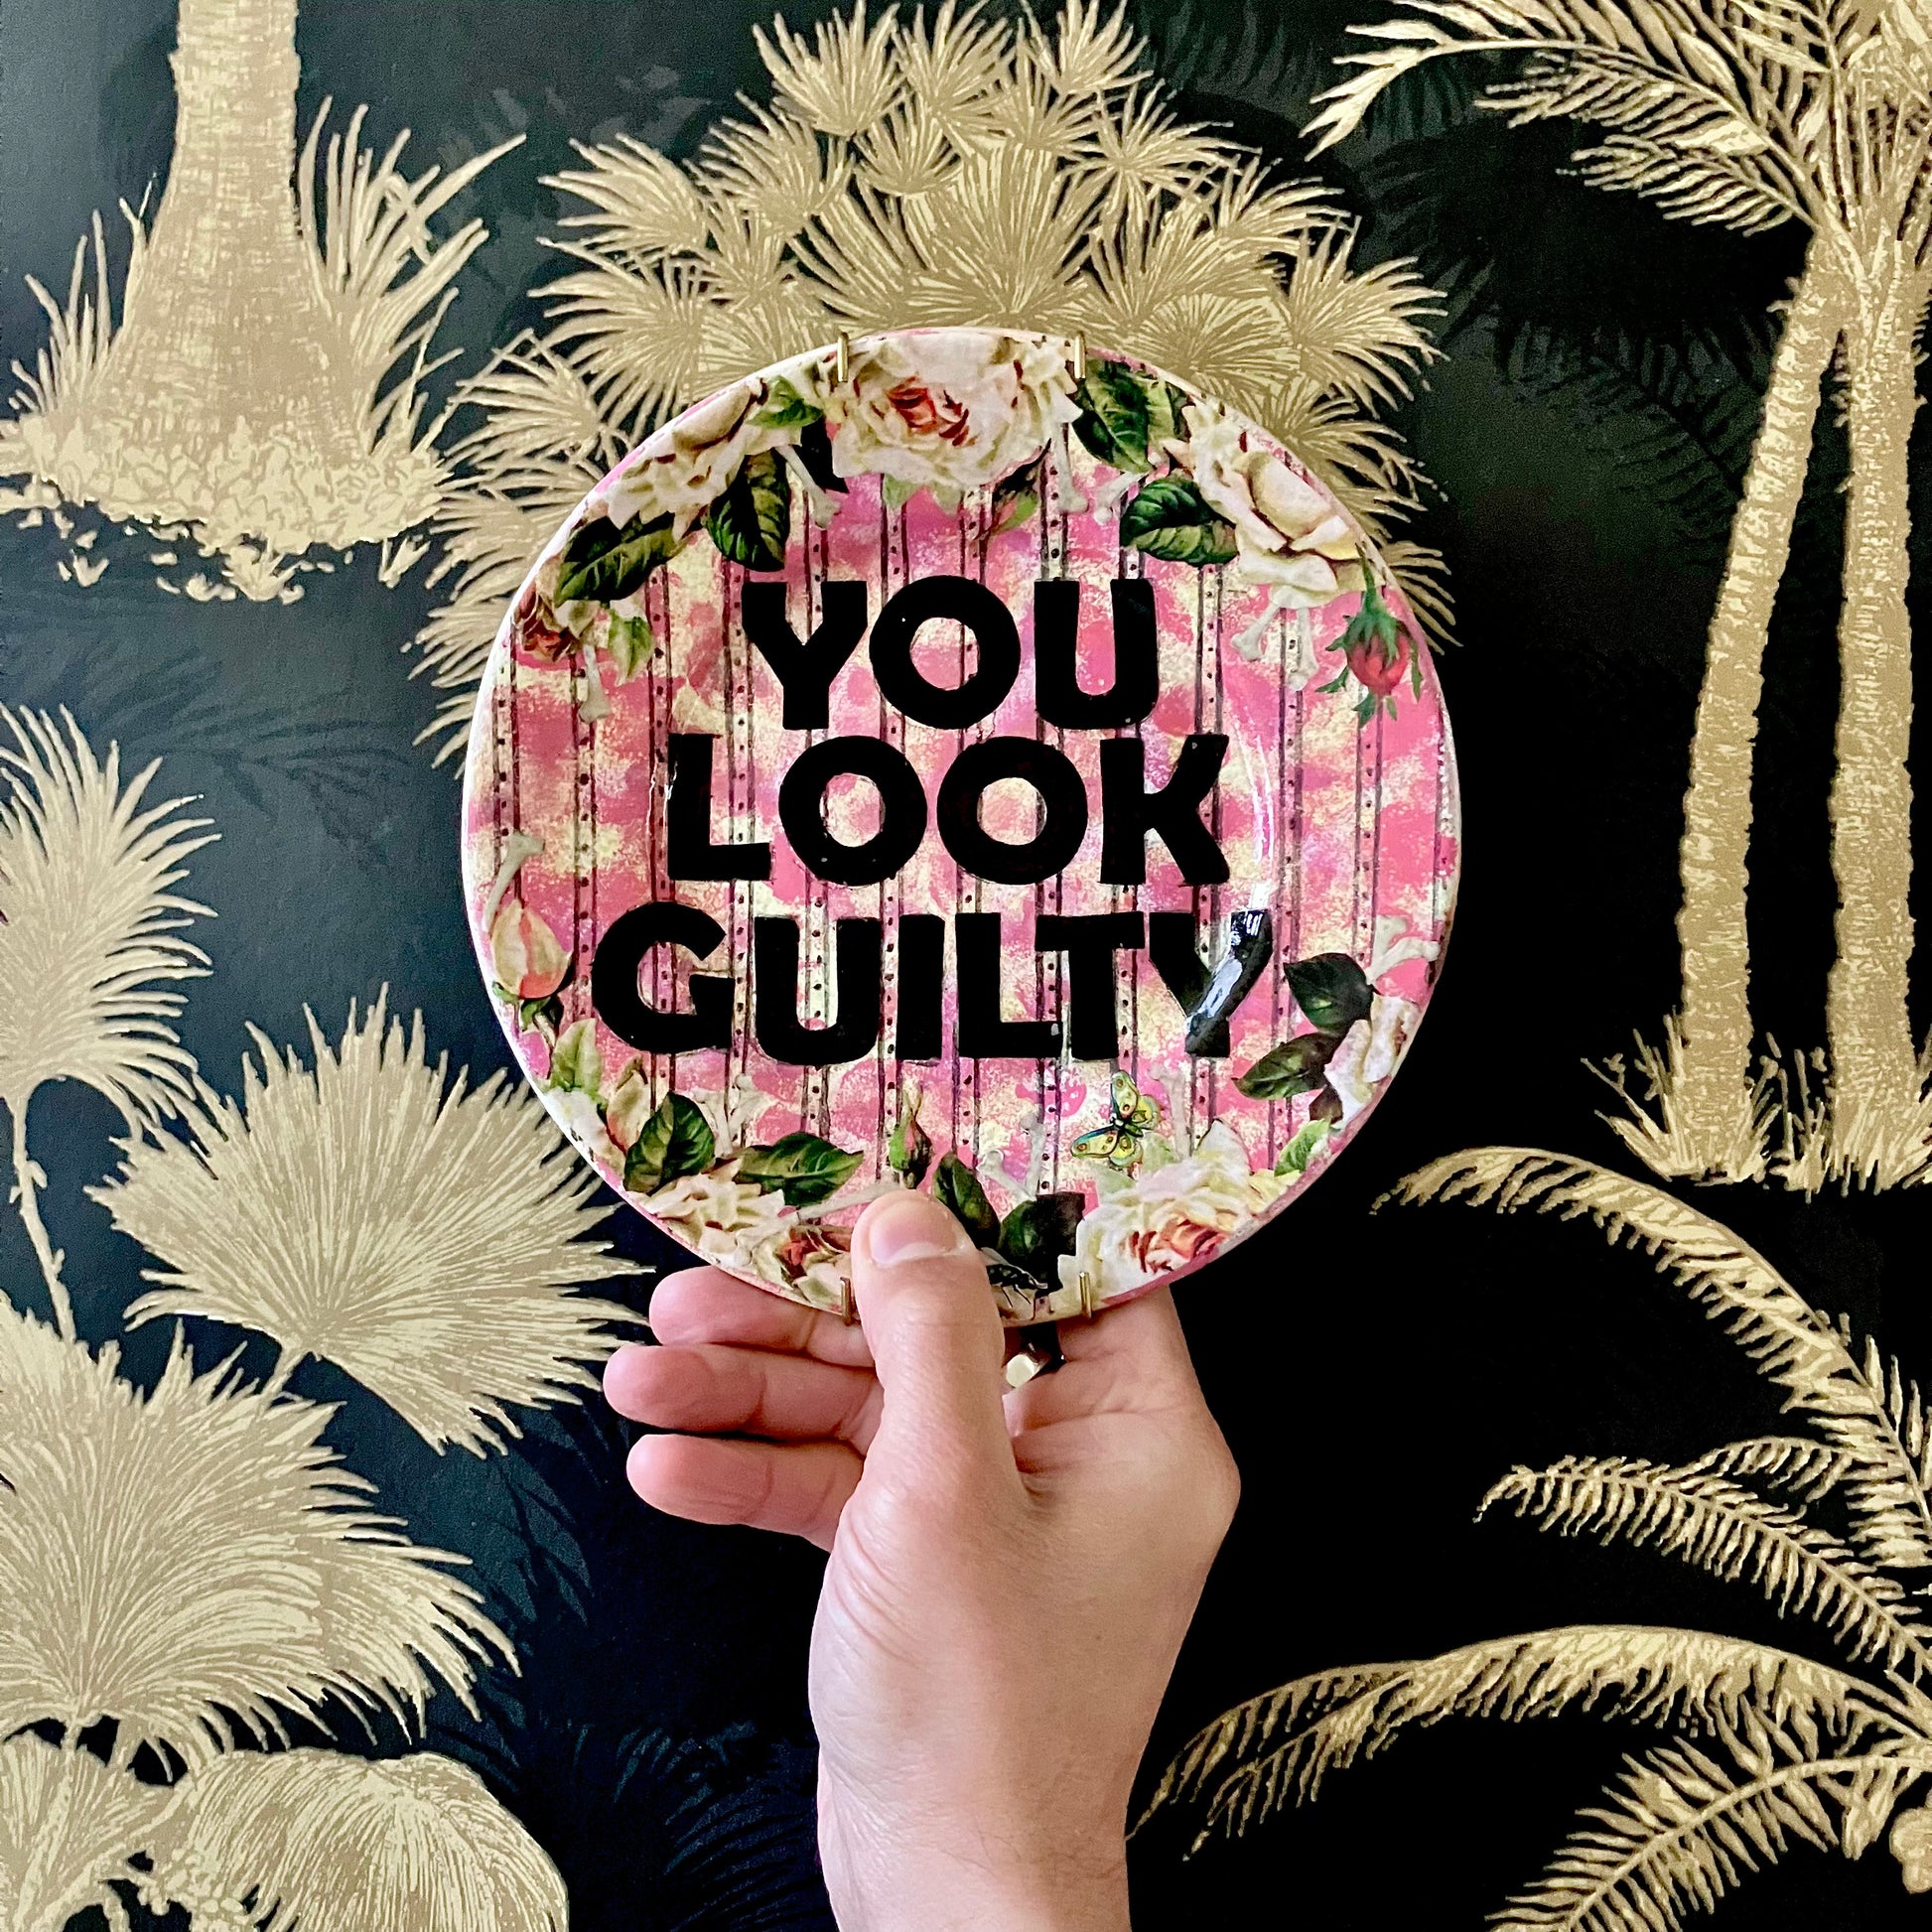 Guilty Wall Plate by House of Frisson